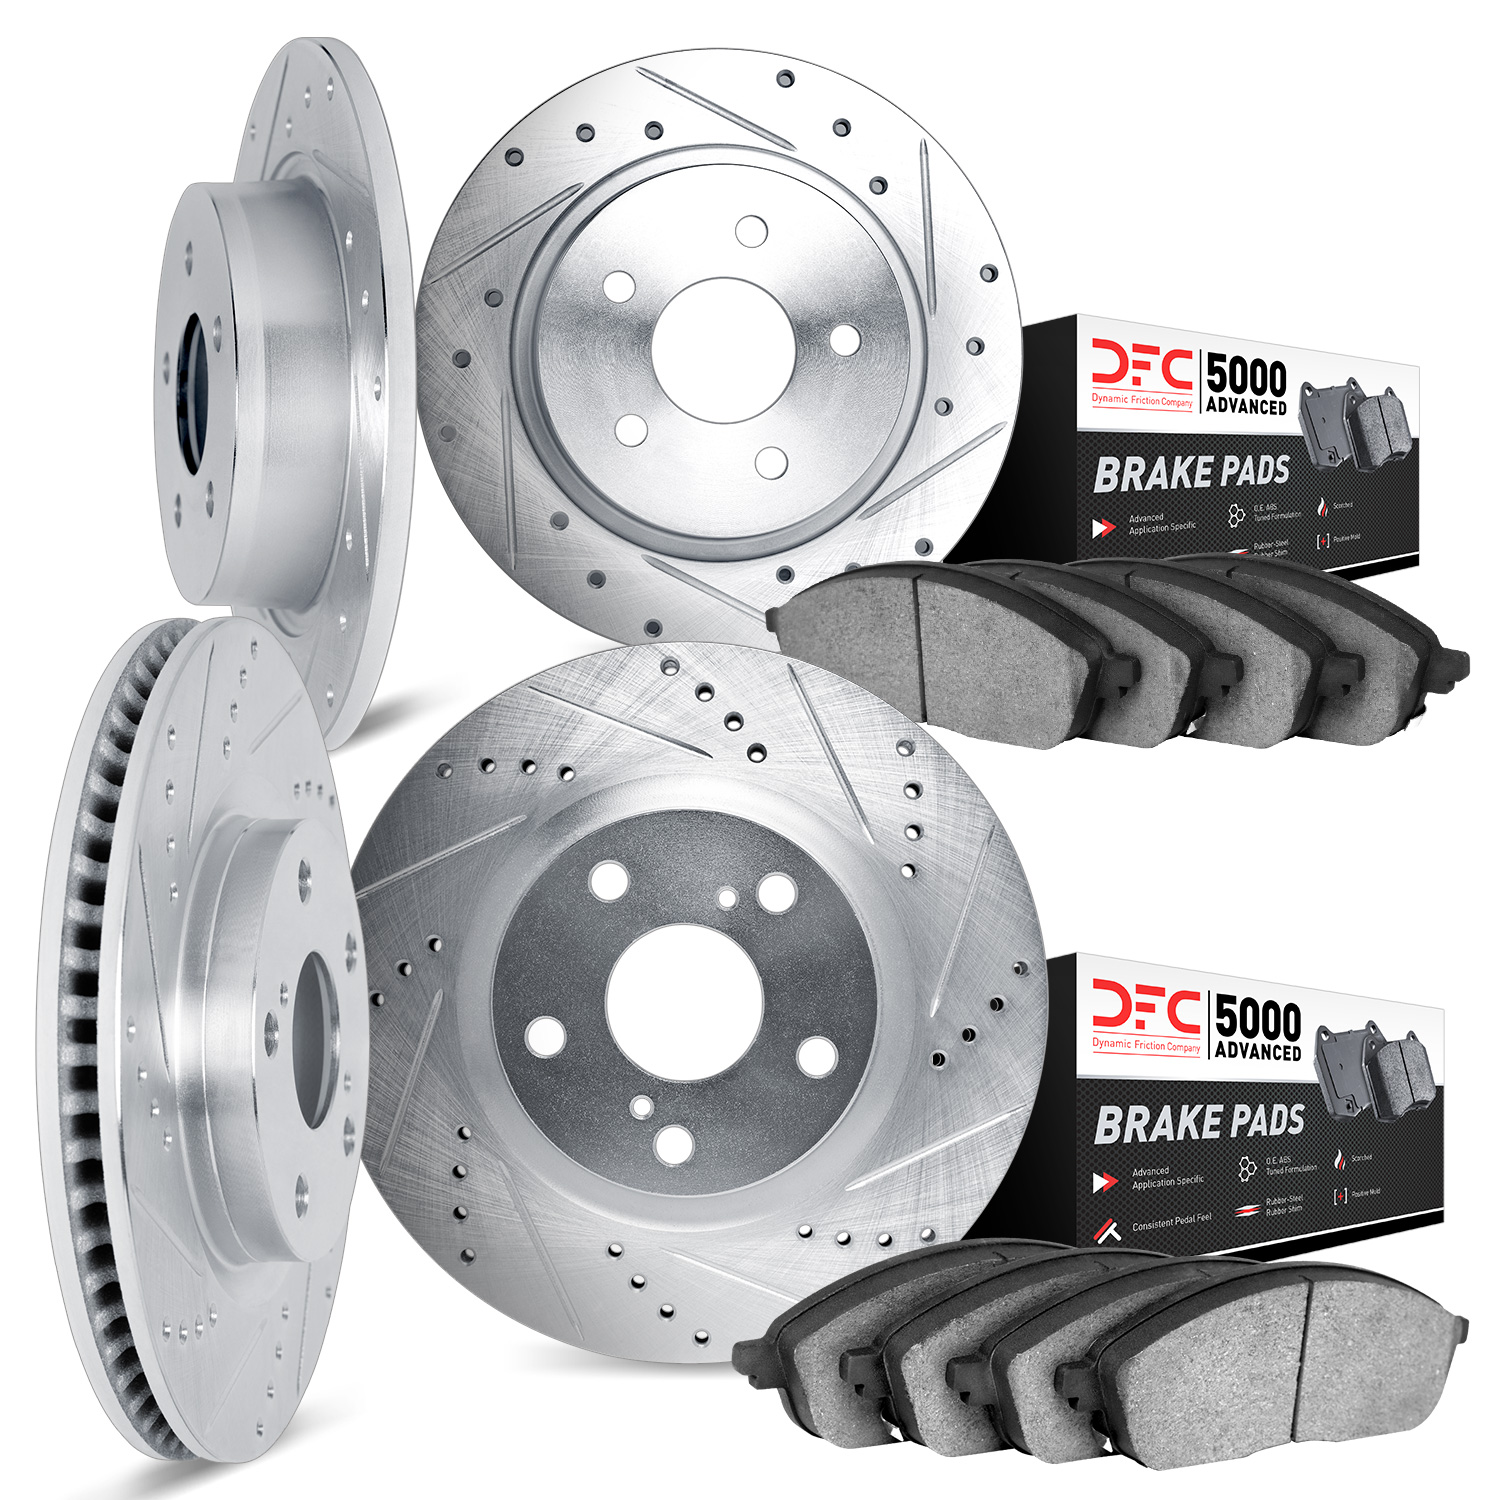 7504-55016 Drilled/Slotted Brake Rotors w/5000 Advanced Brake Pads Kit [Silver], 2003-2011 Ford/Lincoln/Mercury/Mazda, Position: